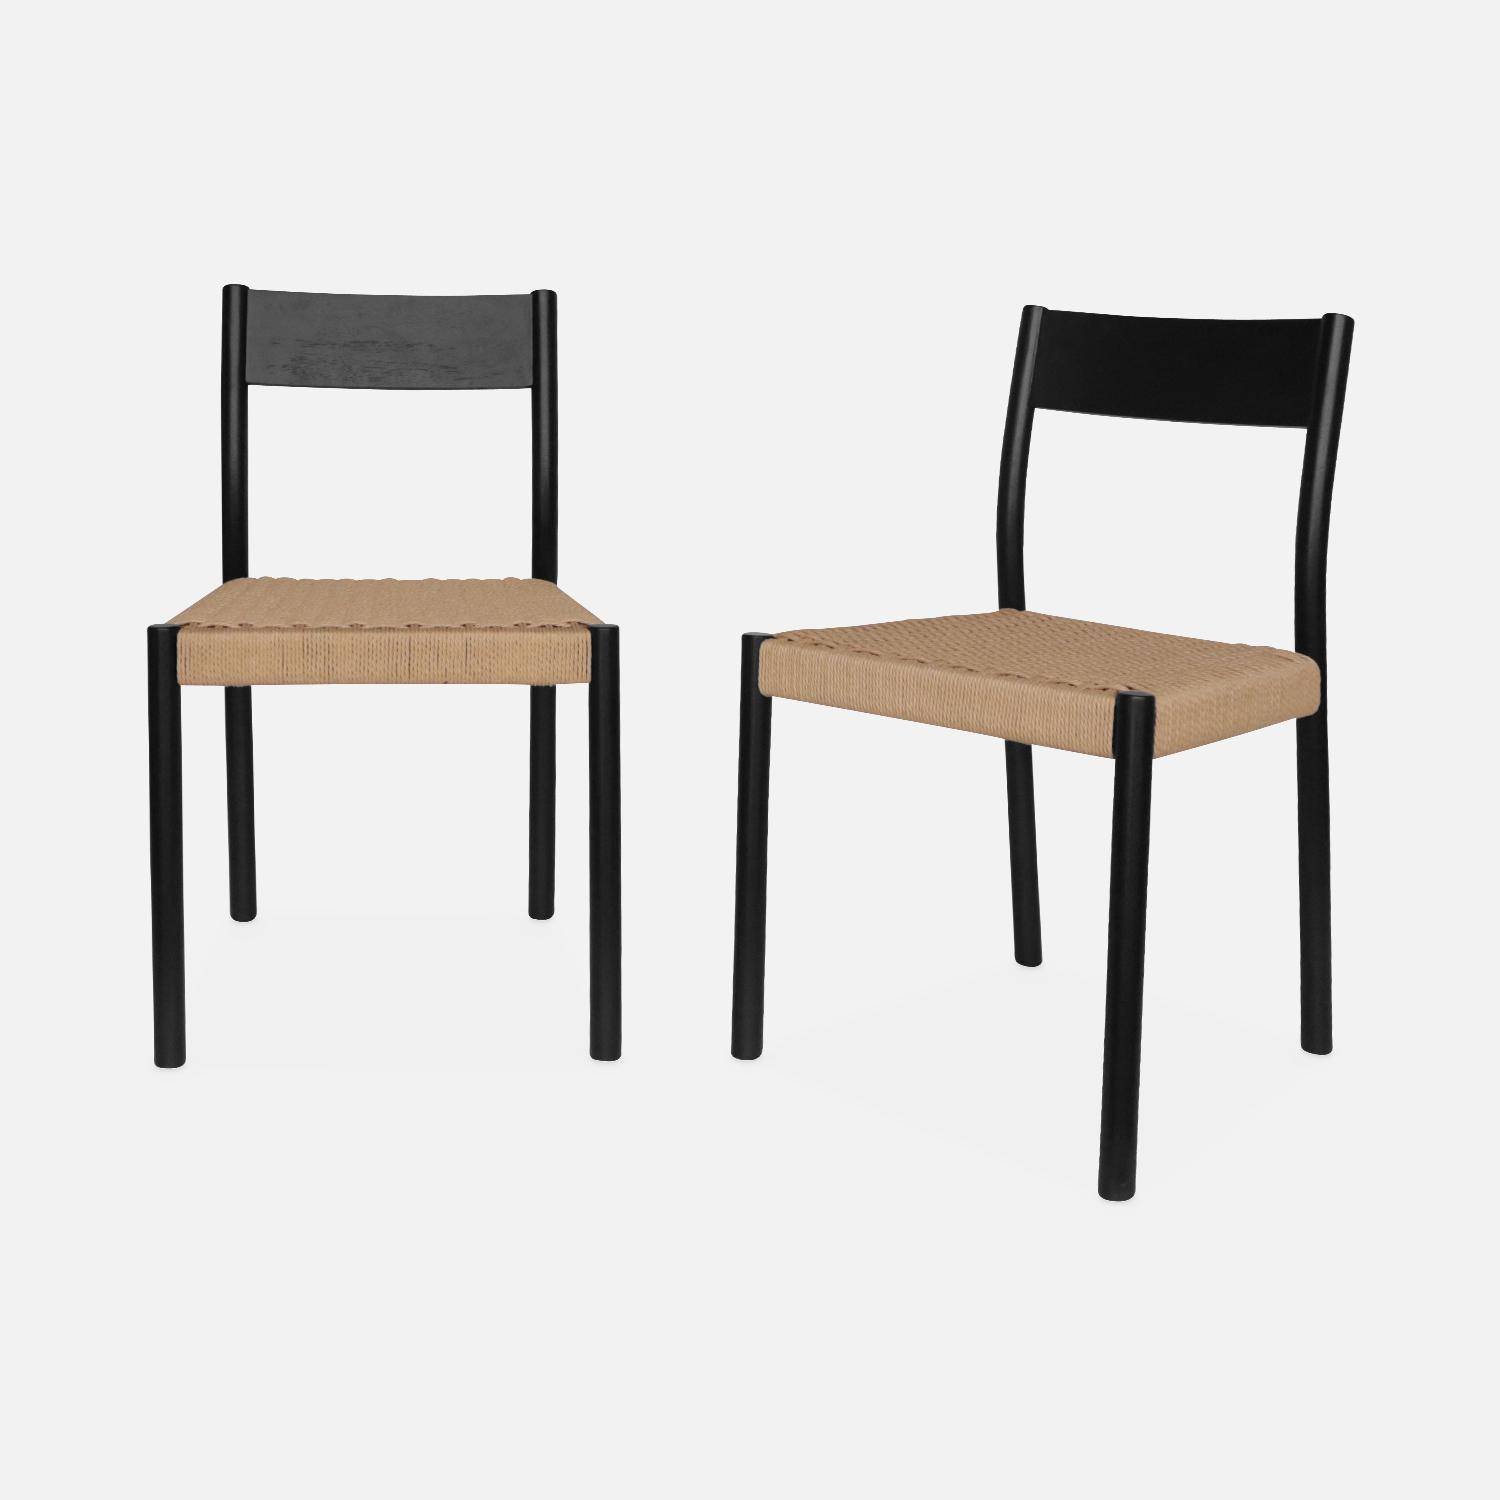 Pair of timeless design Wood and Rope Dining Room chairs, L49.5 x W53 x H82 cm, black,sweeek,Photo4